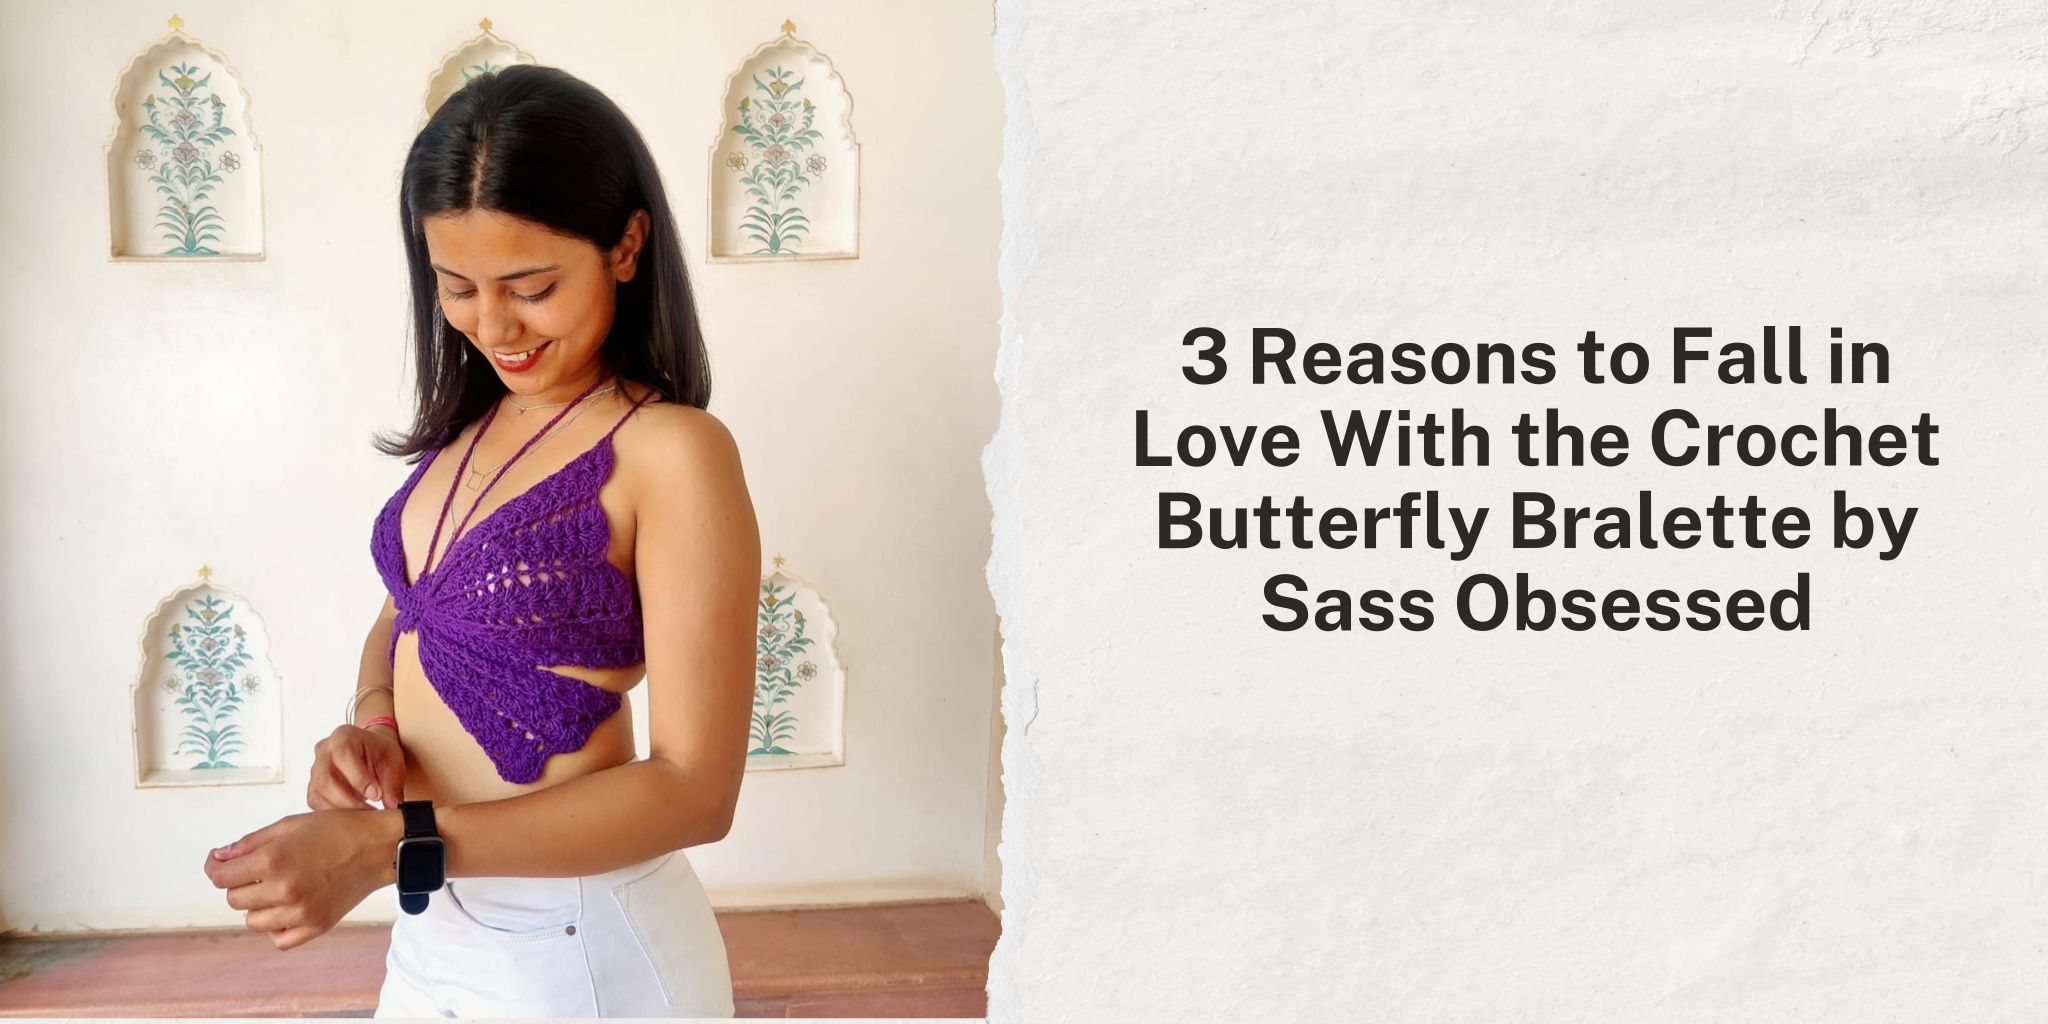 3 Reasons to Fall in Love With the Crochet Butterfly Bralette by Sass Obsessed